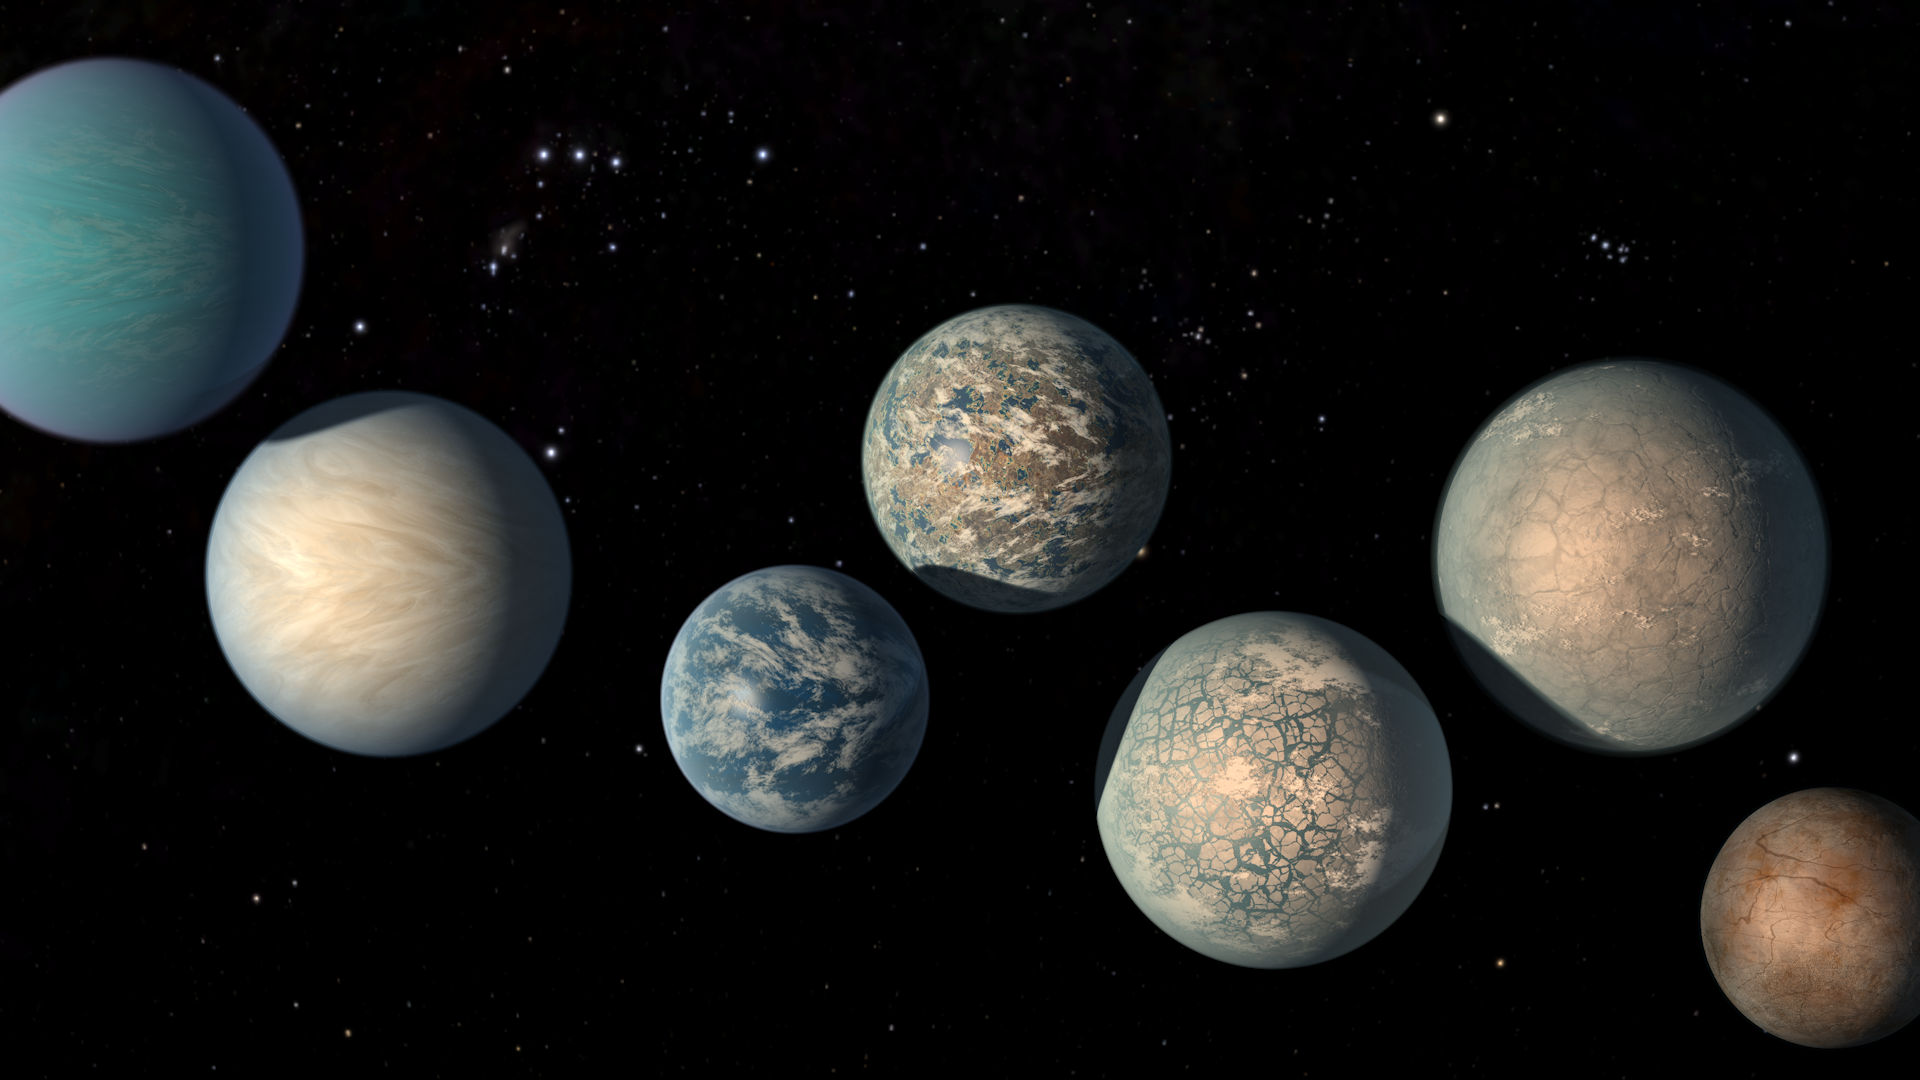 Preview Image for Hubble Observes Atmospheres of TRAPPIST-1 Exoplanets in the Habitable Zone